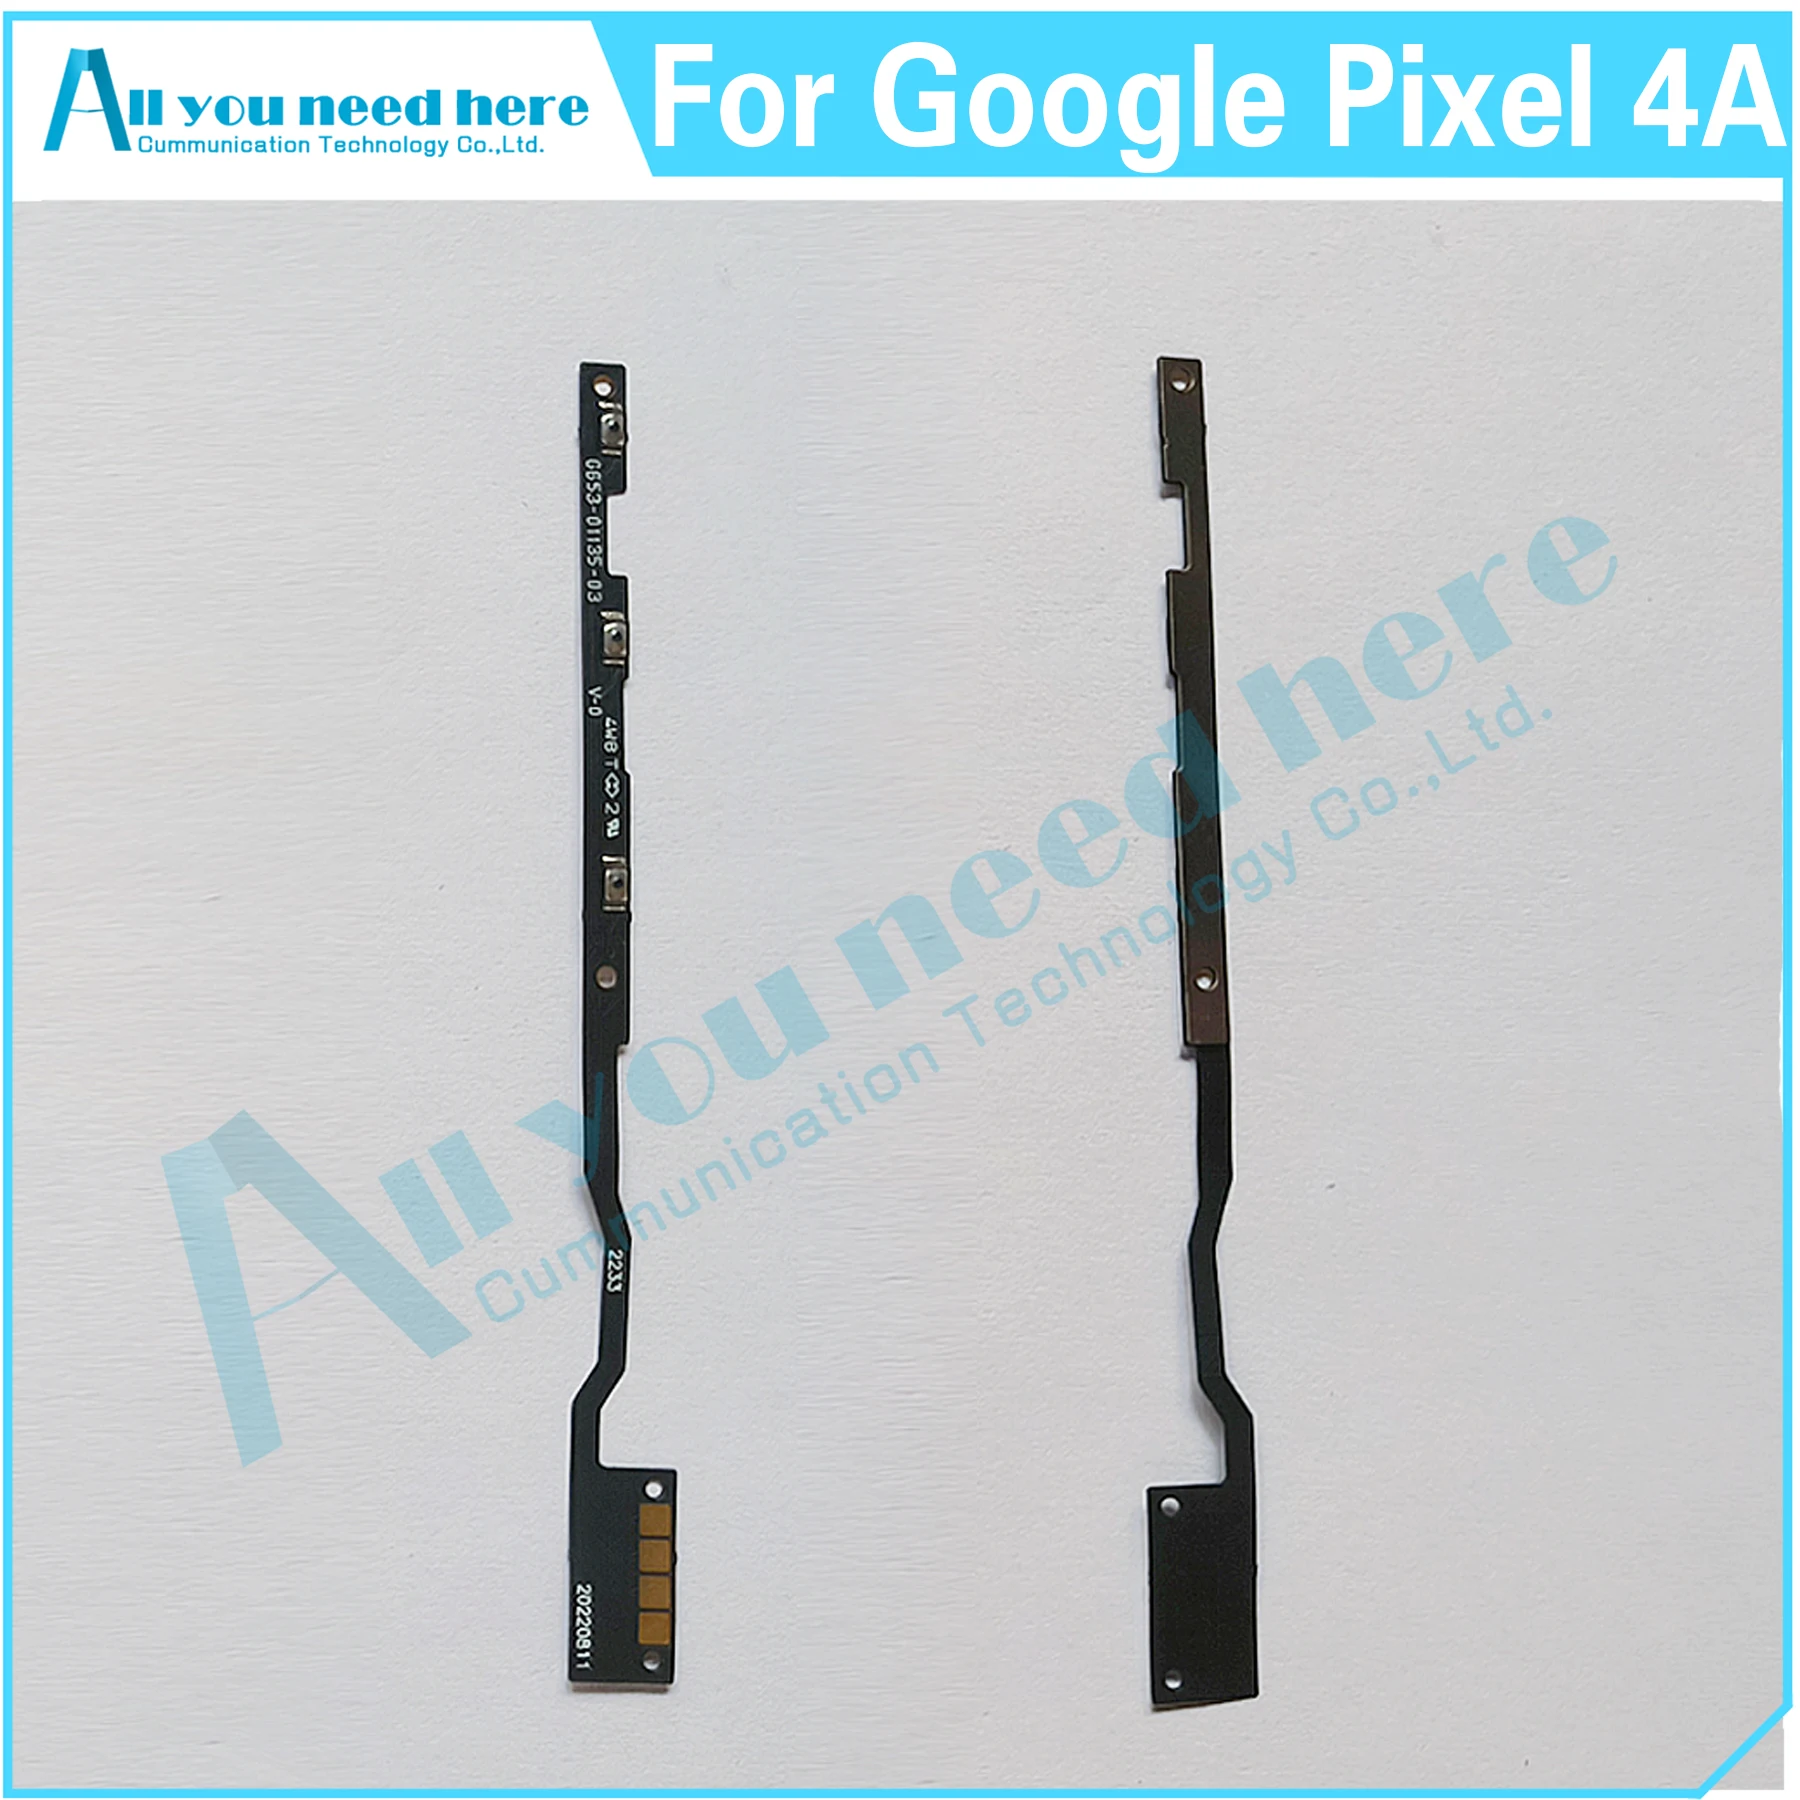 

For Google Pixel 4A G025J GA02099 Volume Side Power Button Switch Key Cable Flex ON OFF Cable Replacement